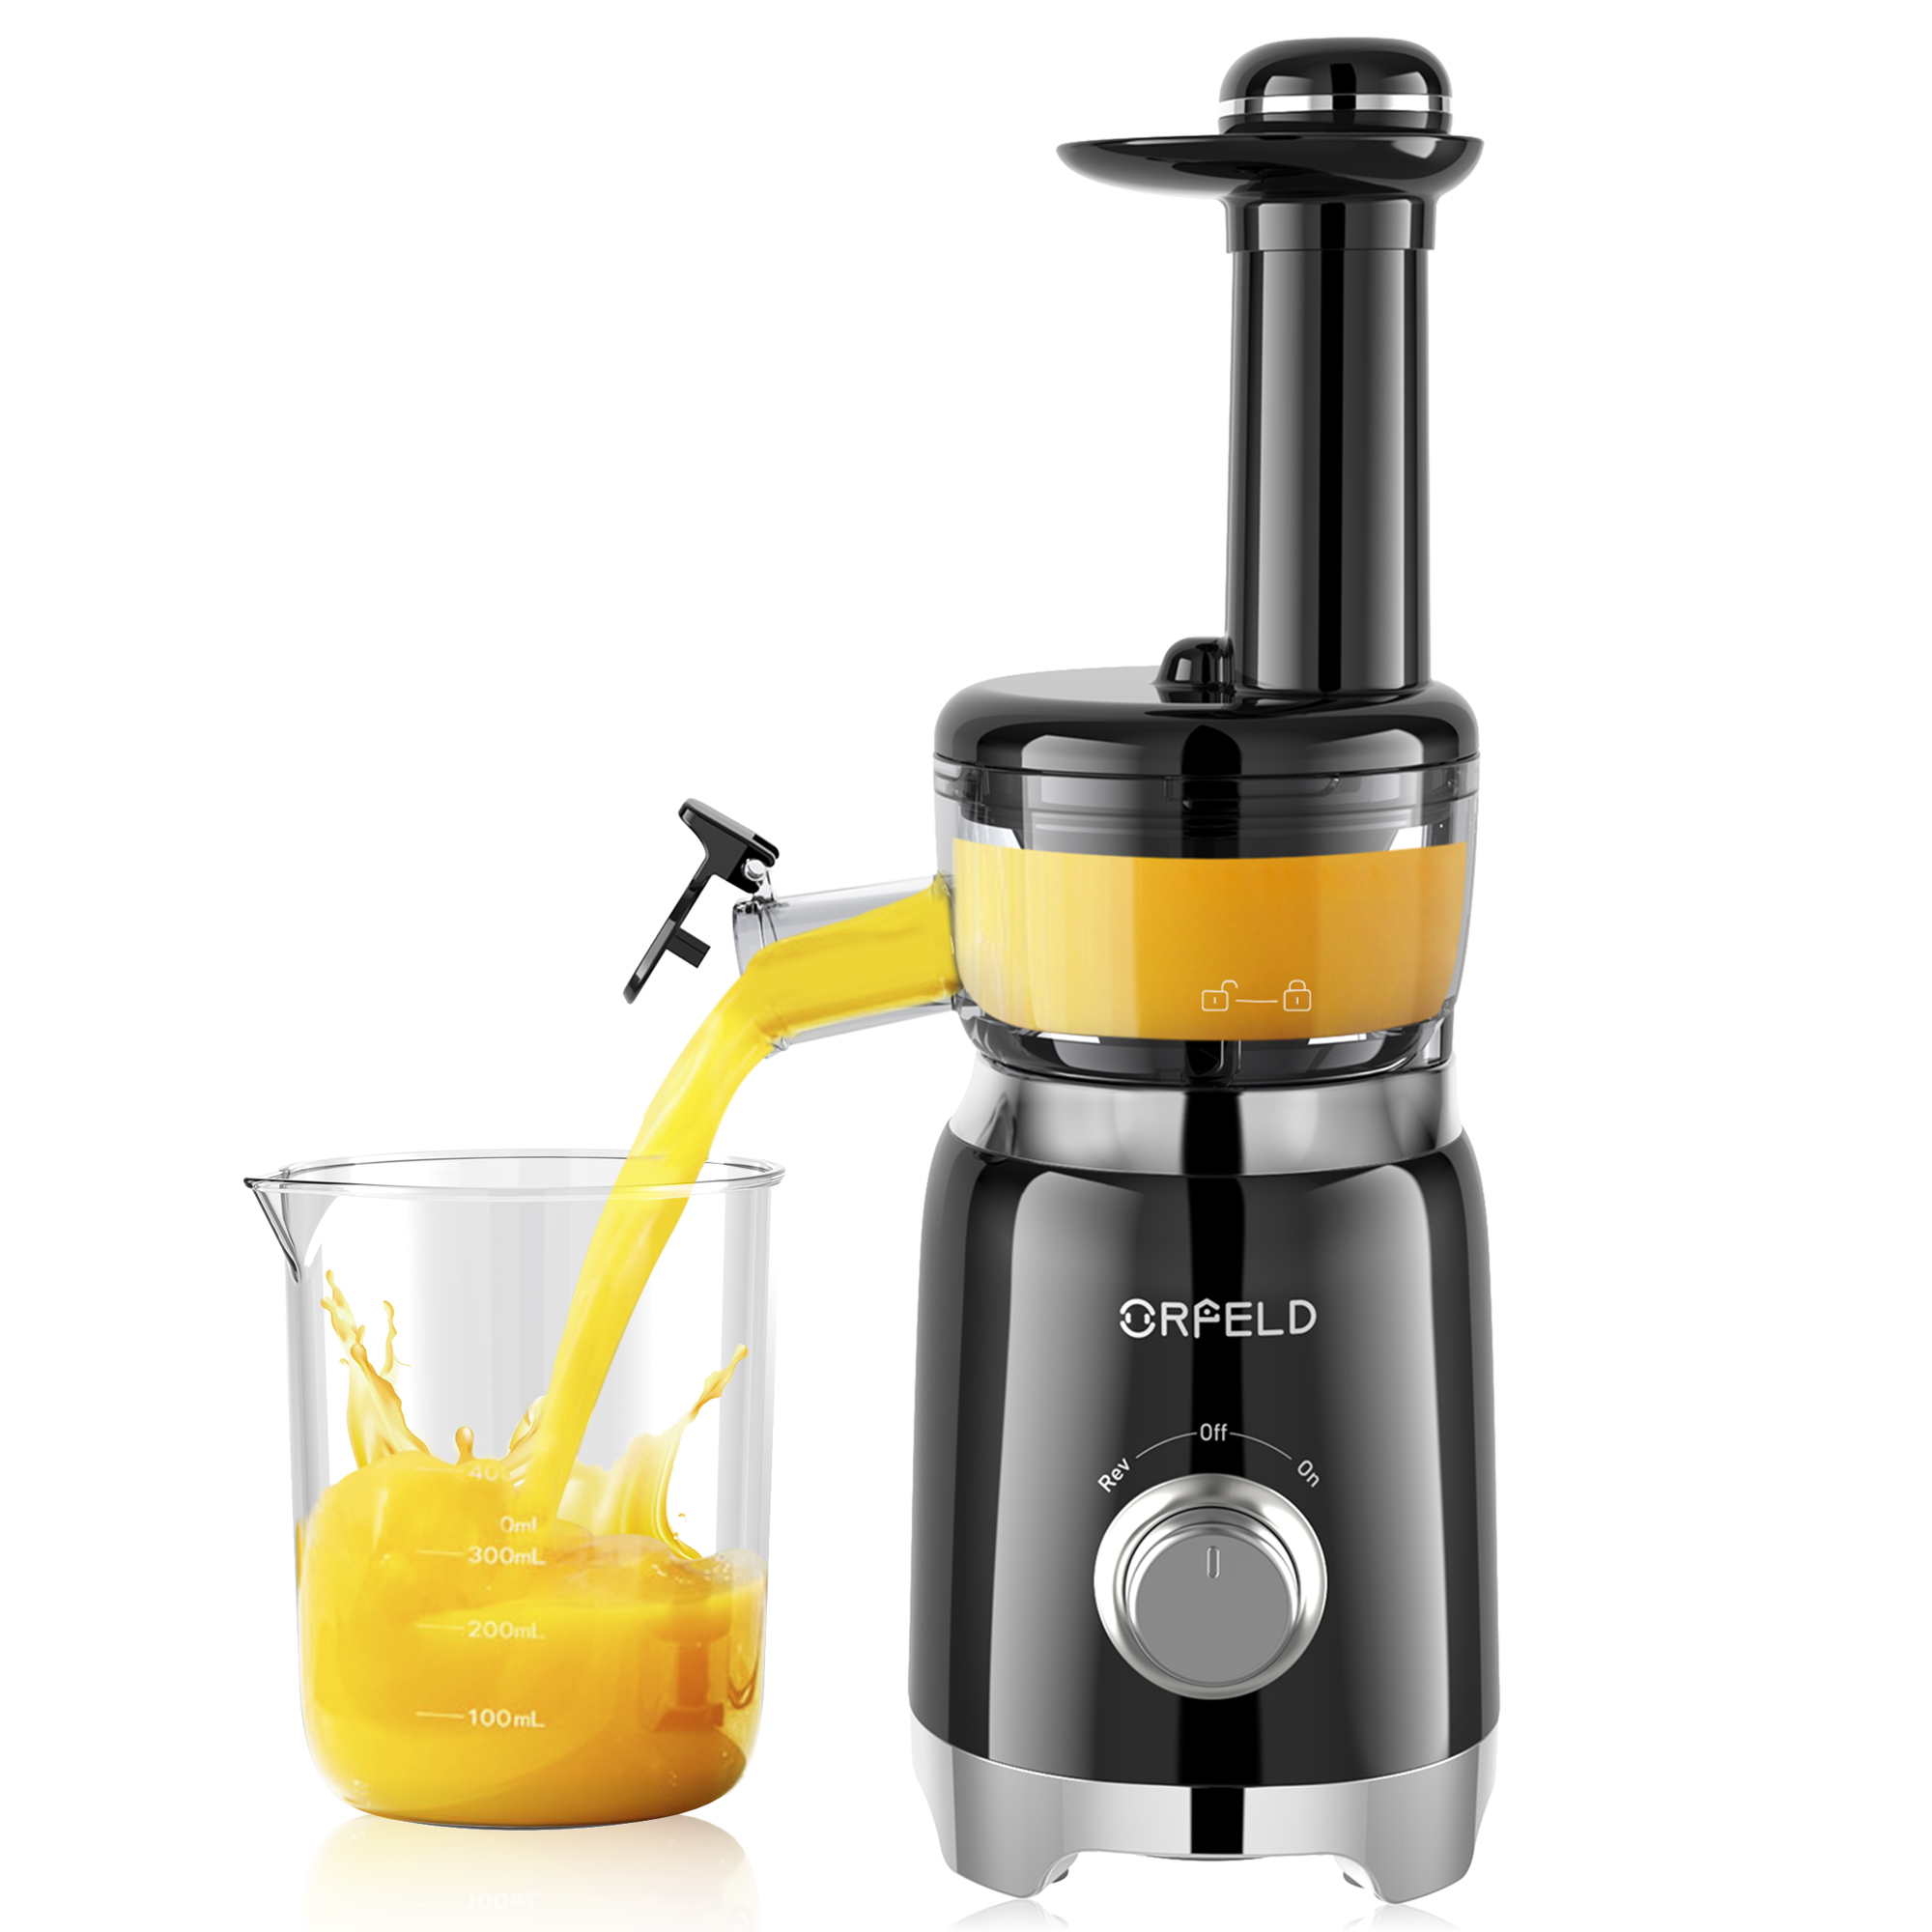 Masticating Juicer, ORFELD 100W Juicers Machine New Extractors for Fruits and Vegetables, Black - image 1 of 13